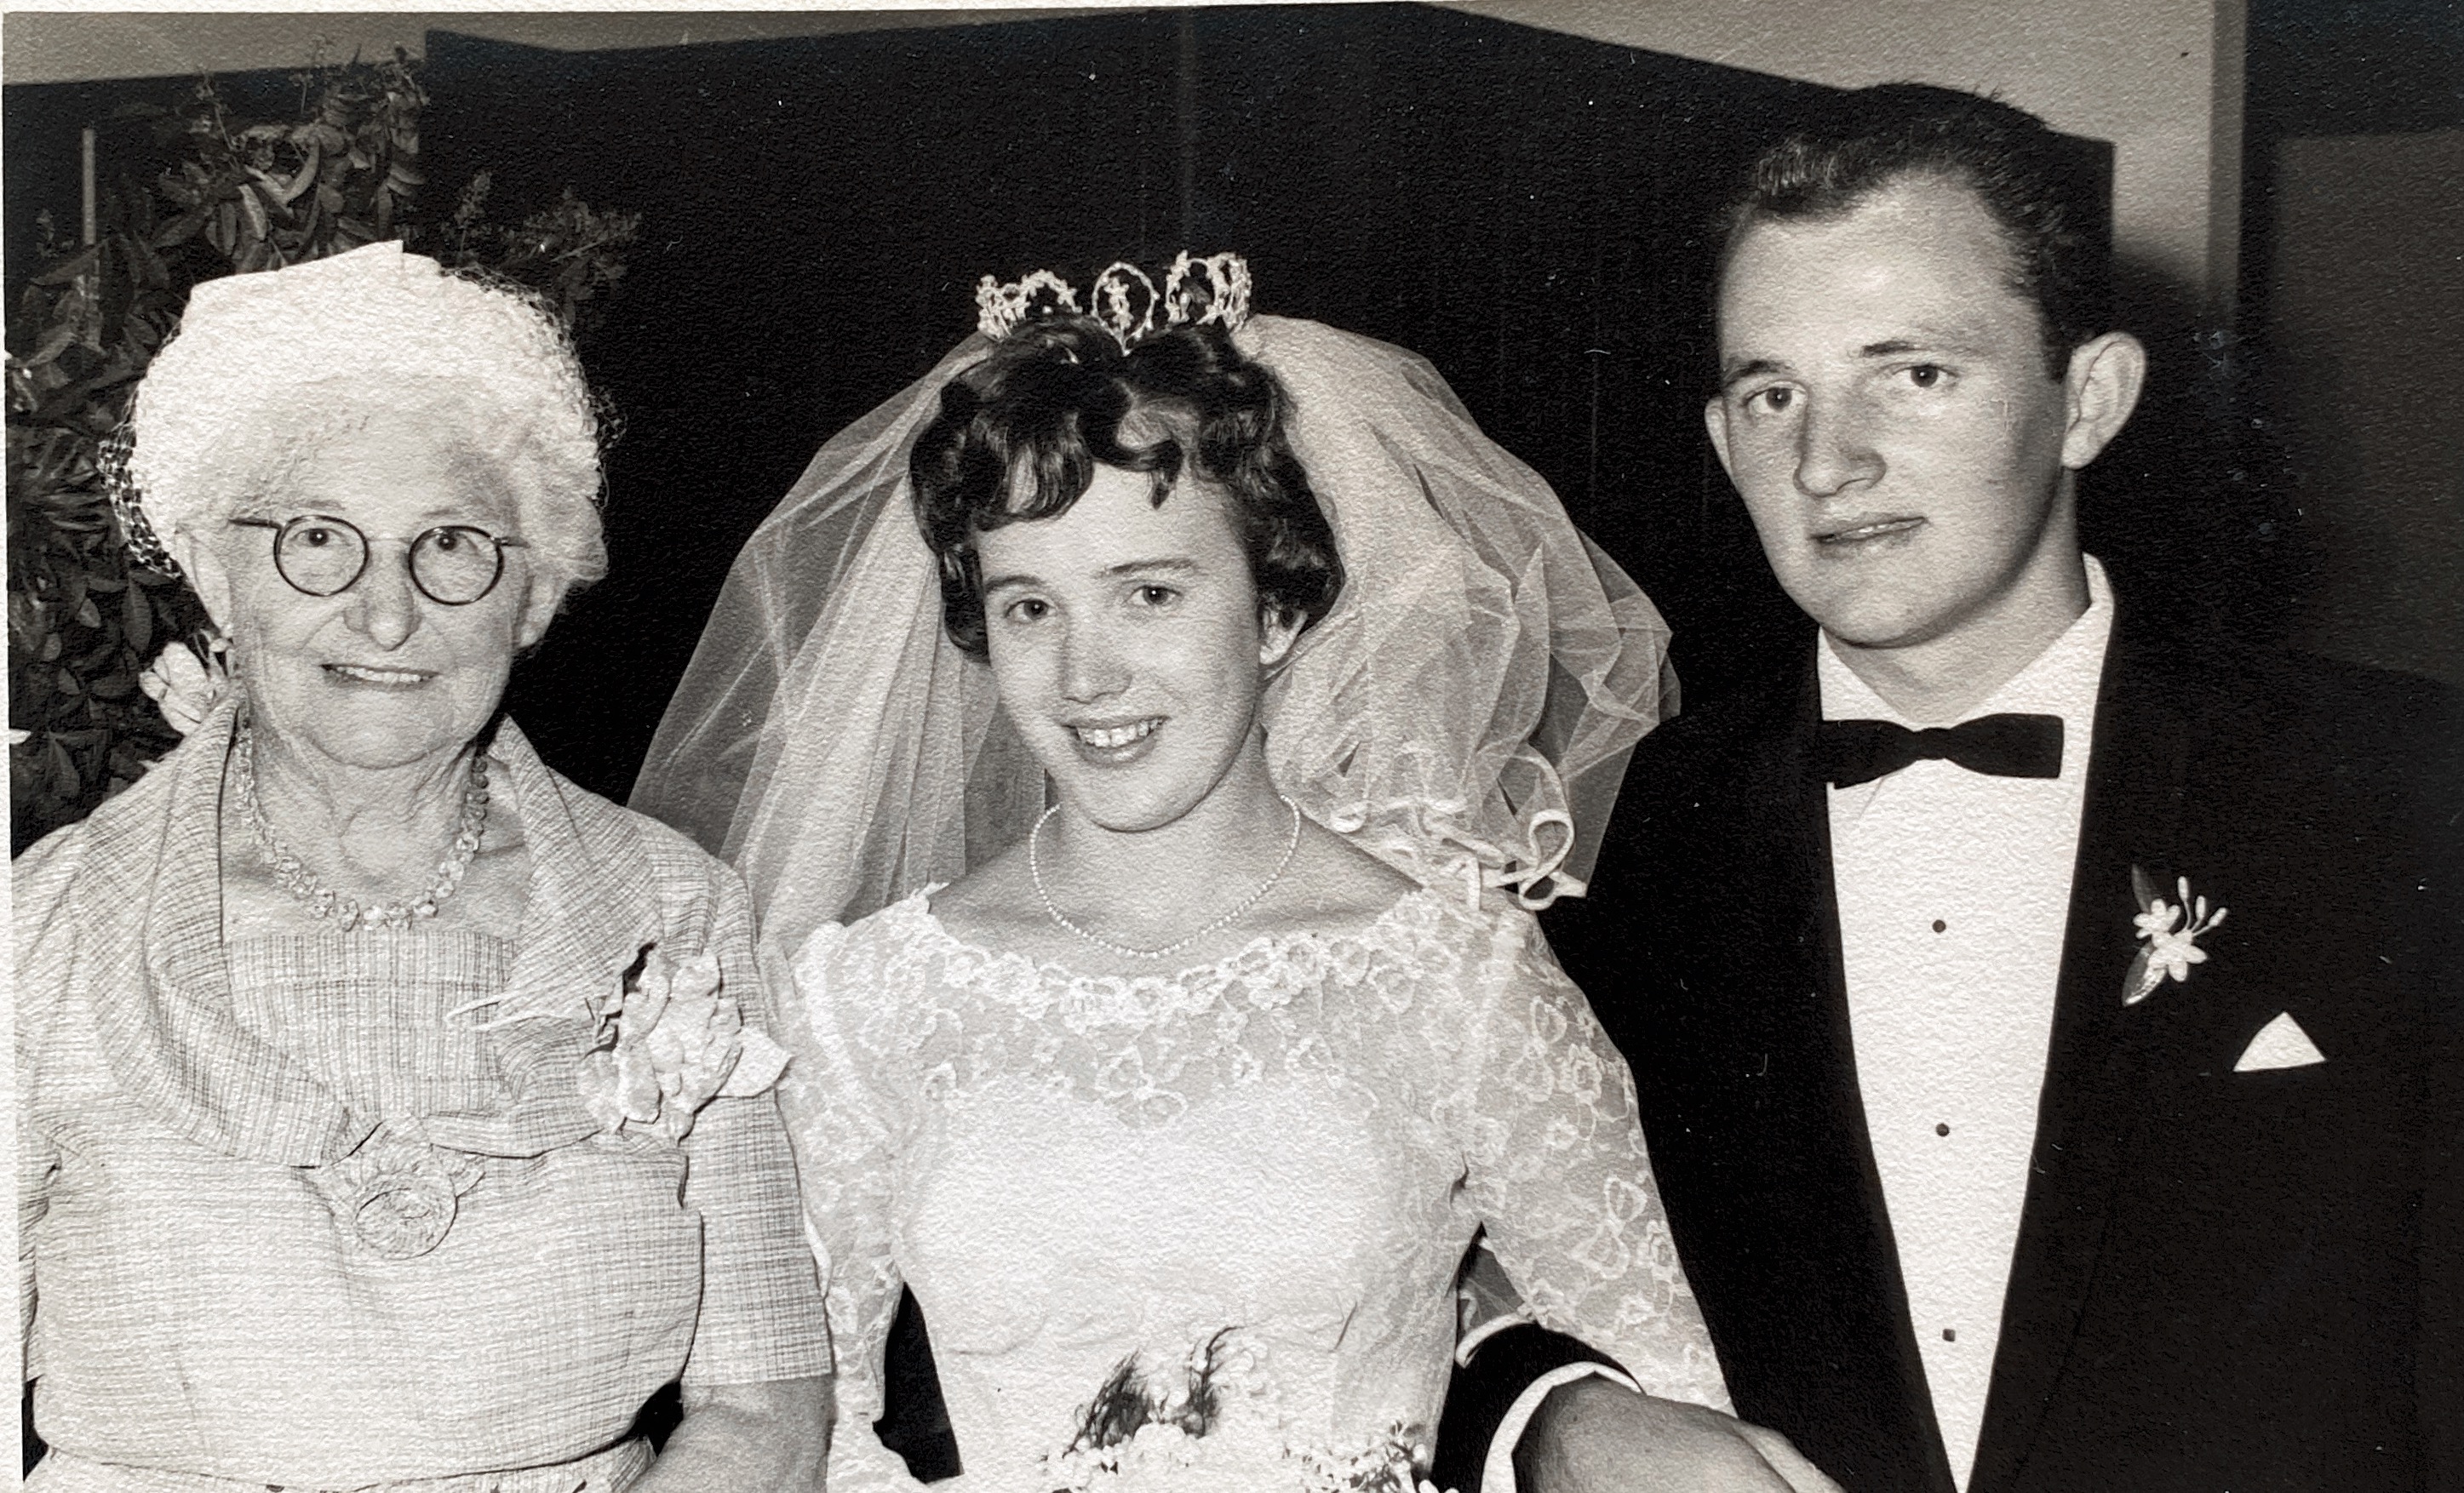 Milton and Janet’s wedding in 1963